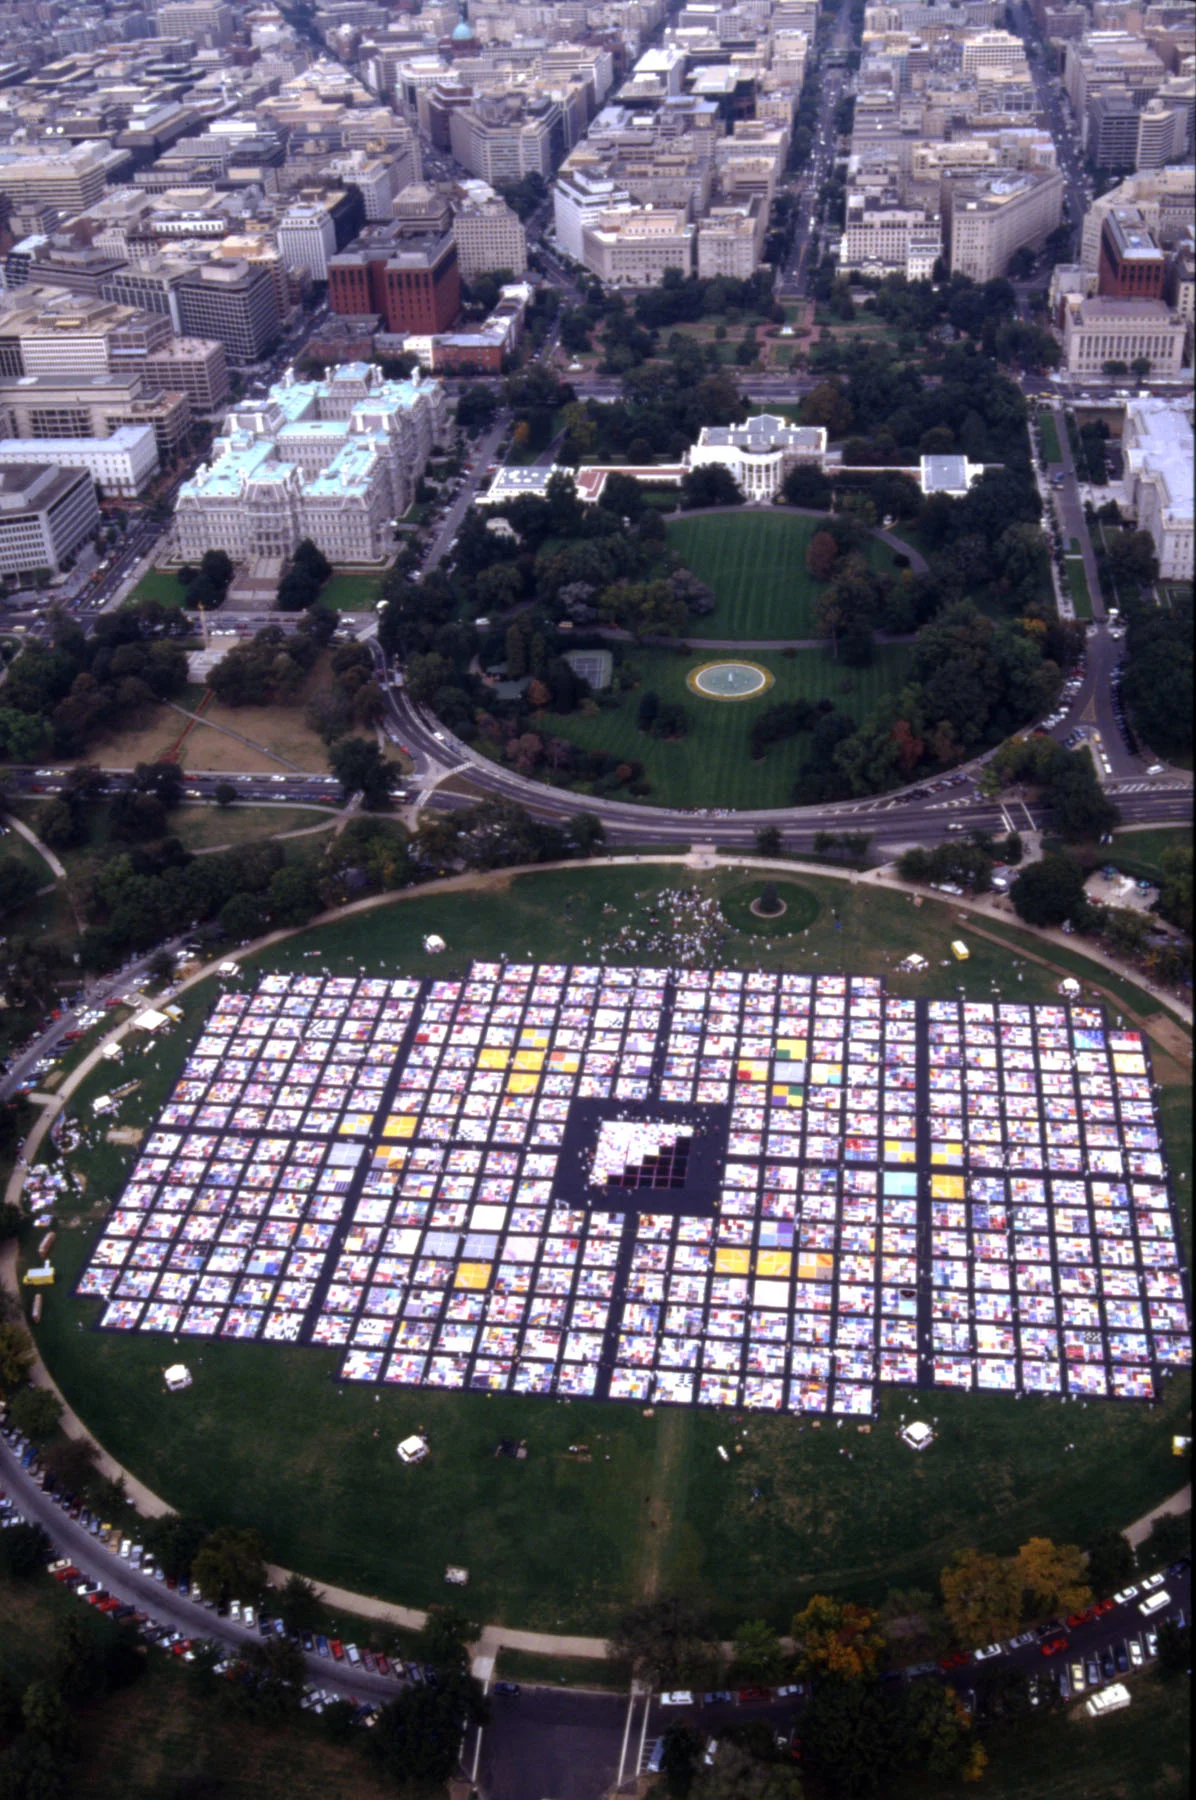 A color photograph showing a bird’s eye view of the White House and the lawn in front of it, covered in hundreds of quilts, laid out next to each other in neat rows.